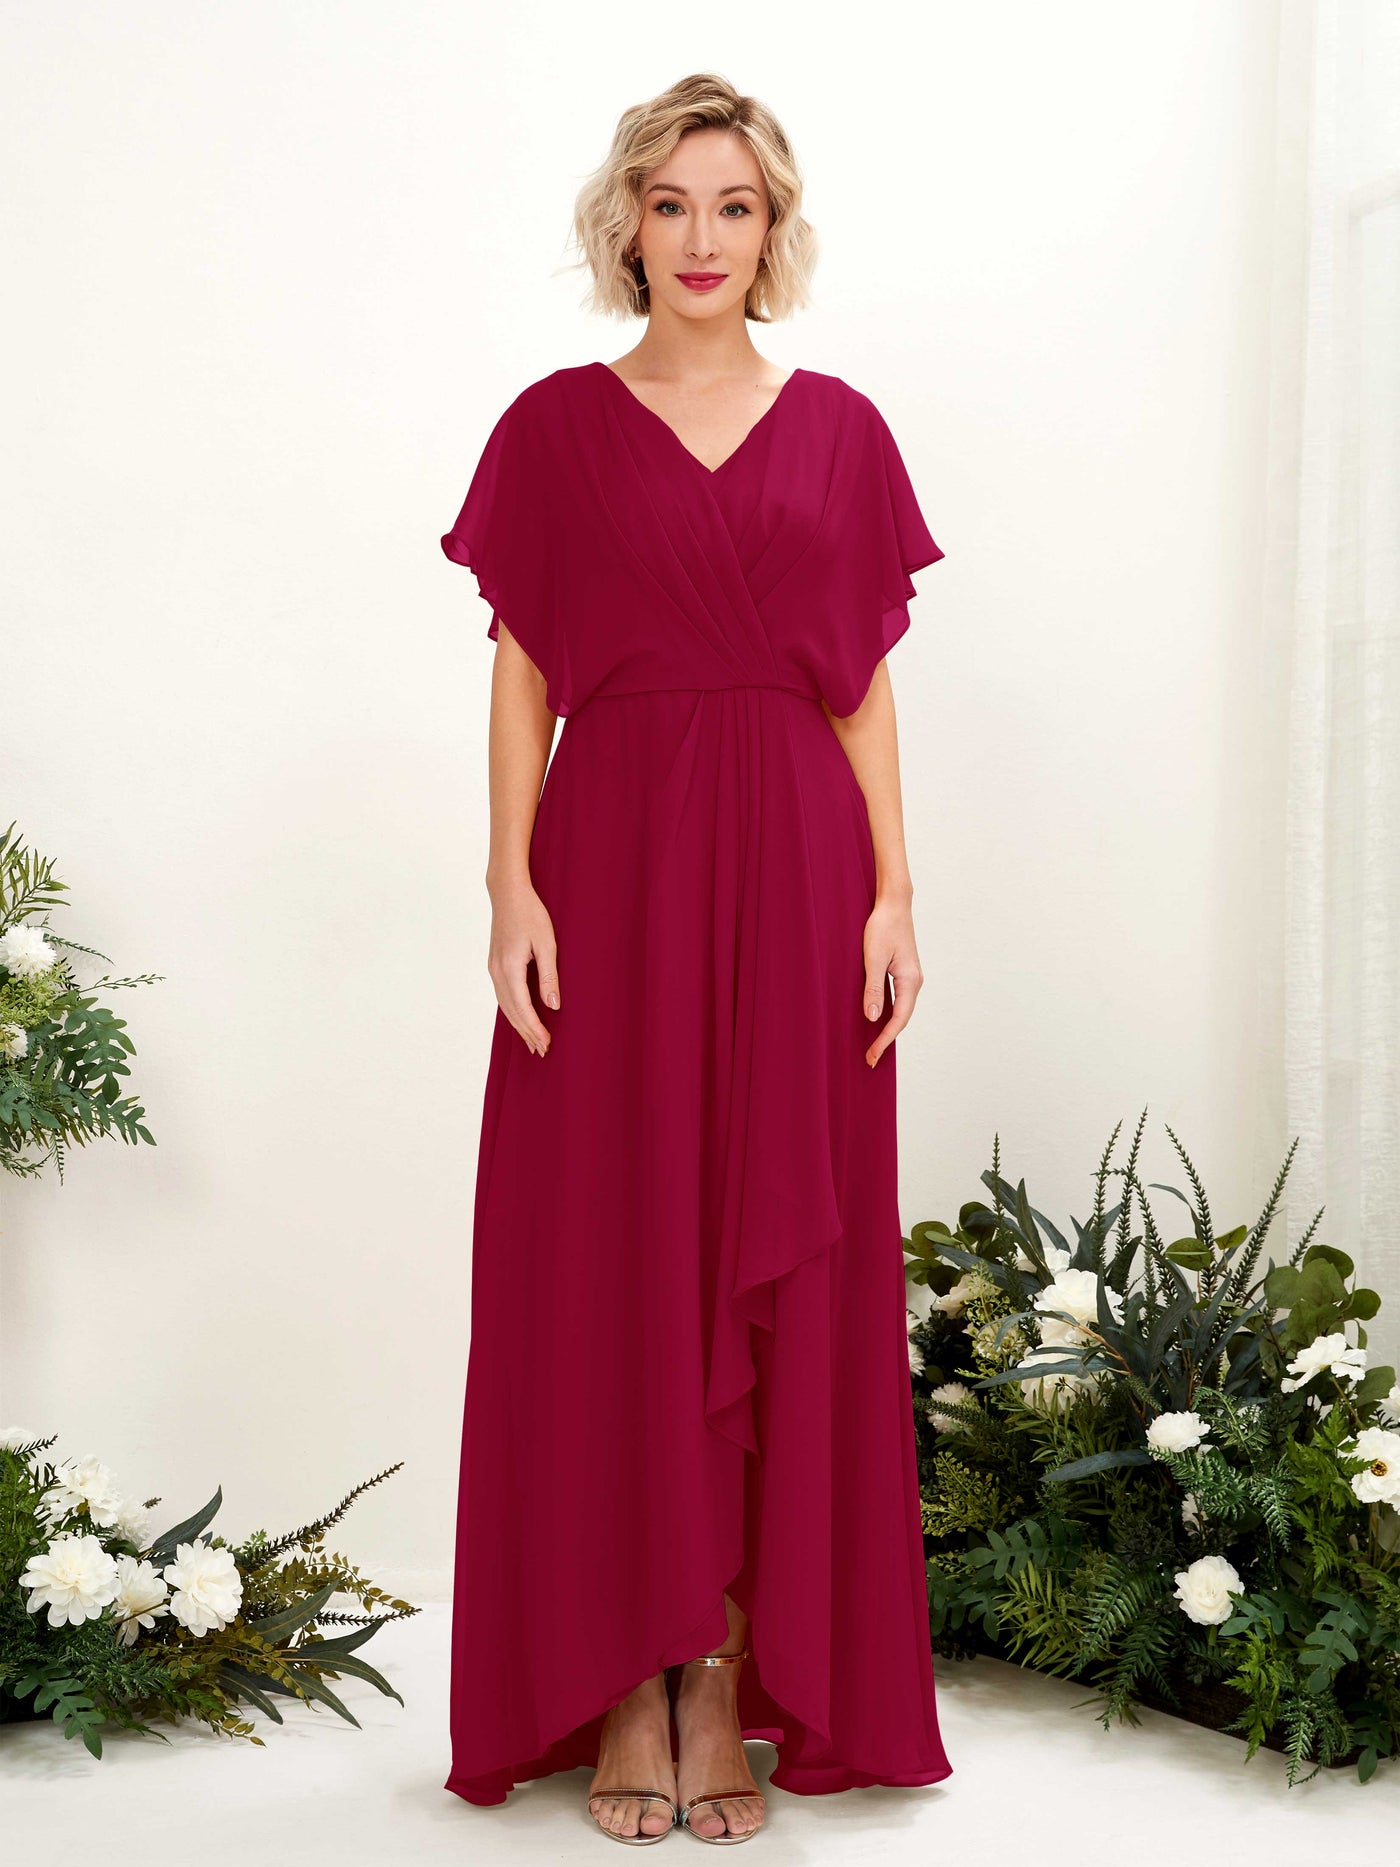 Jester Red Bridesmaid Dresses Bridesmaid Dress A-line Chiffon V-neck Full Length Short Sleeves Wedding Party Dress (81222141)#color_jester-red